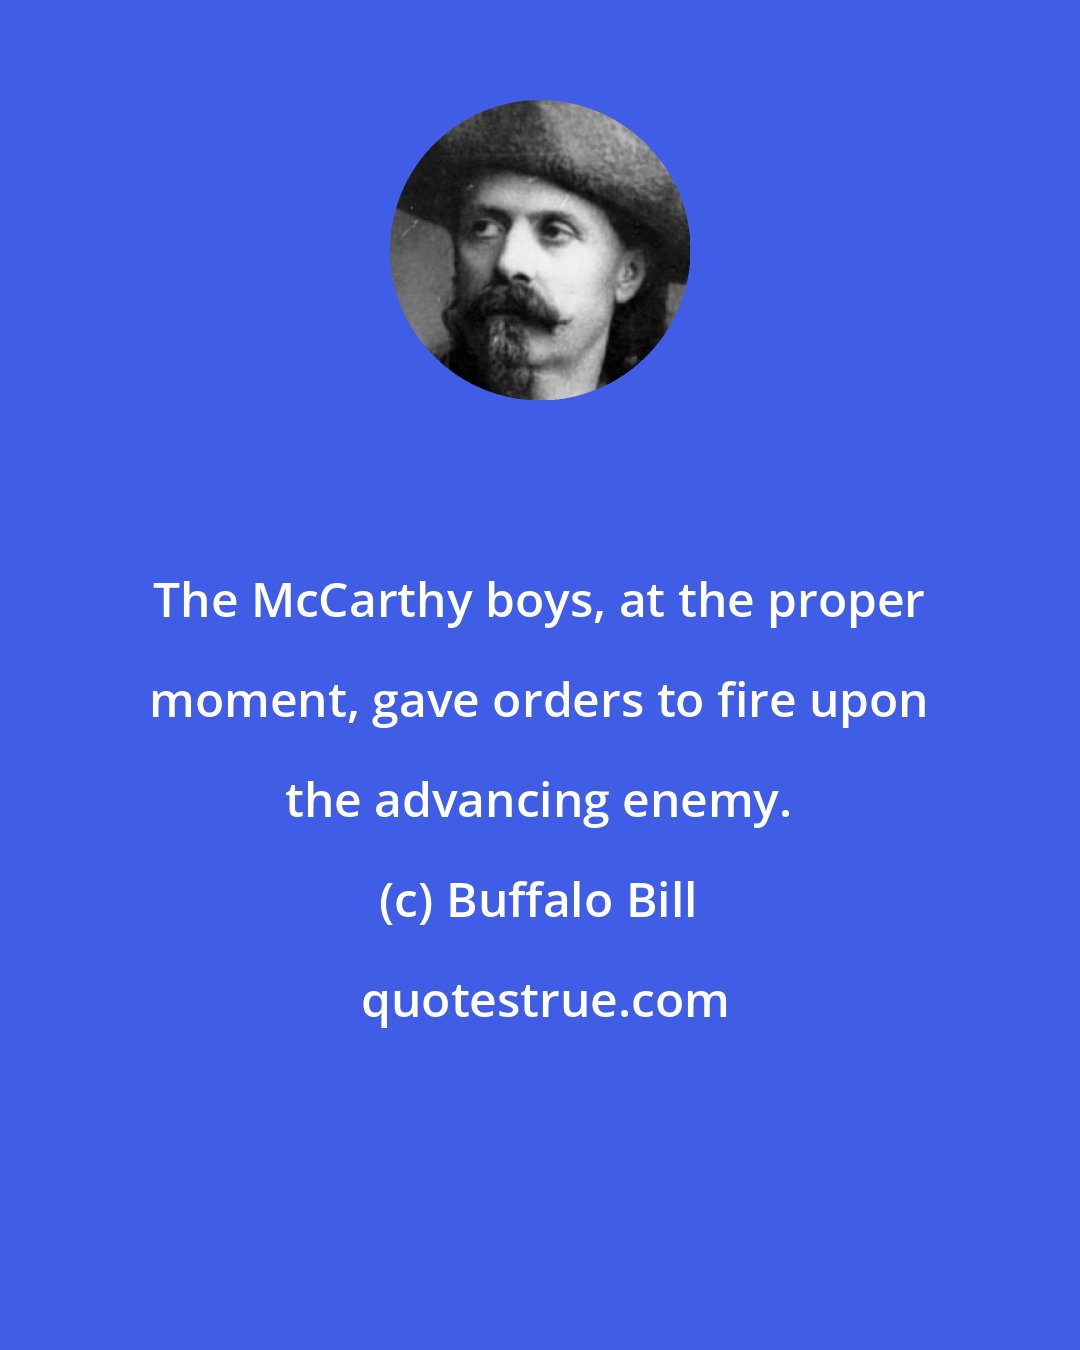 Buffalo Bill: The McCarthy boys, at the proper moment, gave orders to fire upon the advancing enemy.